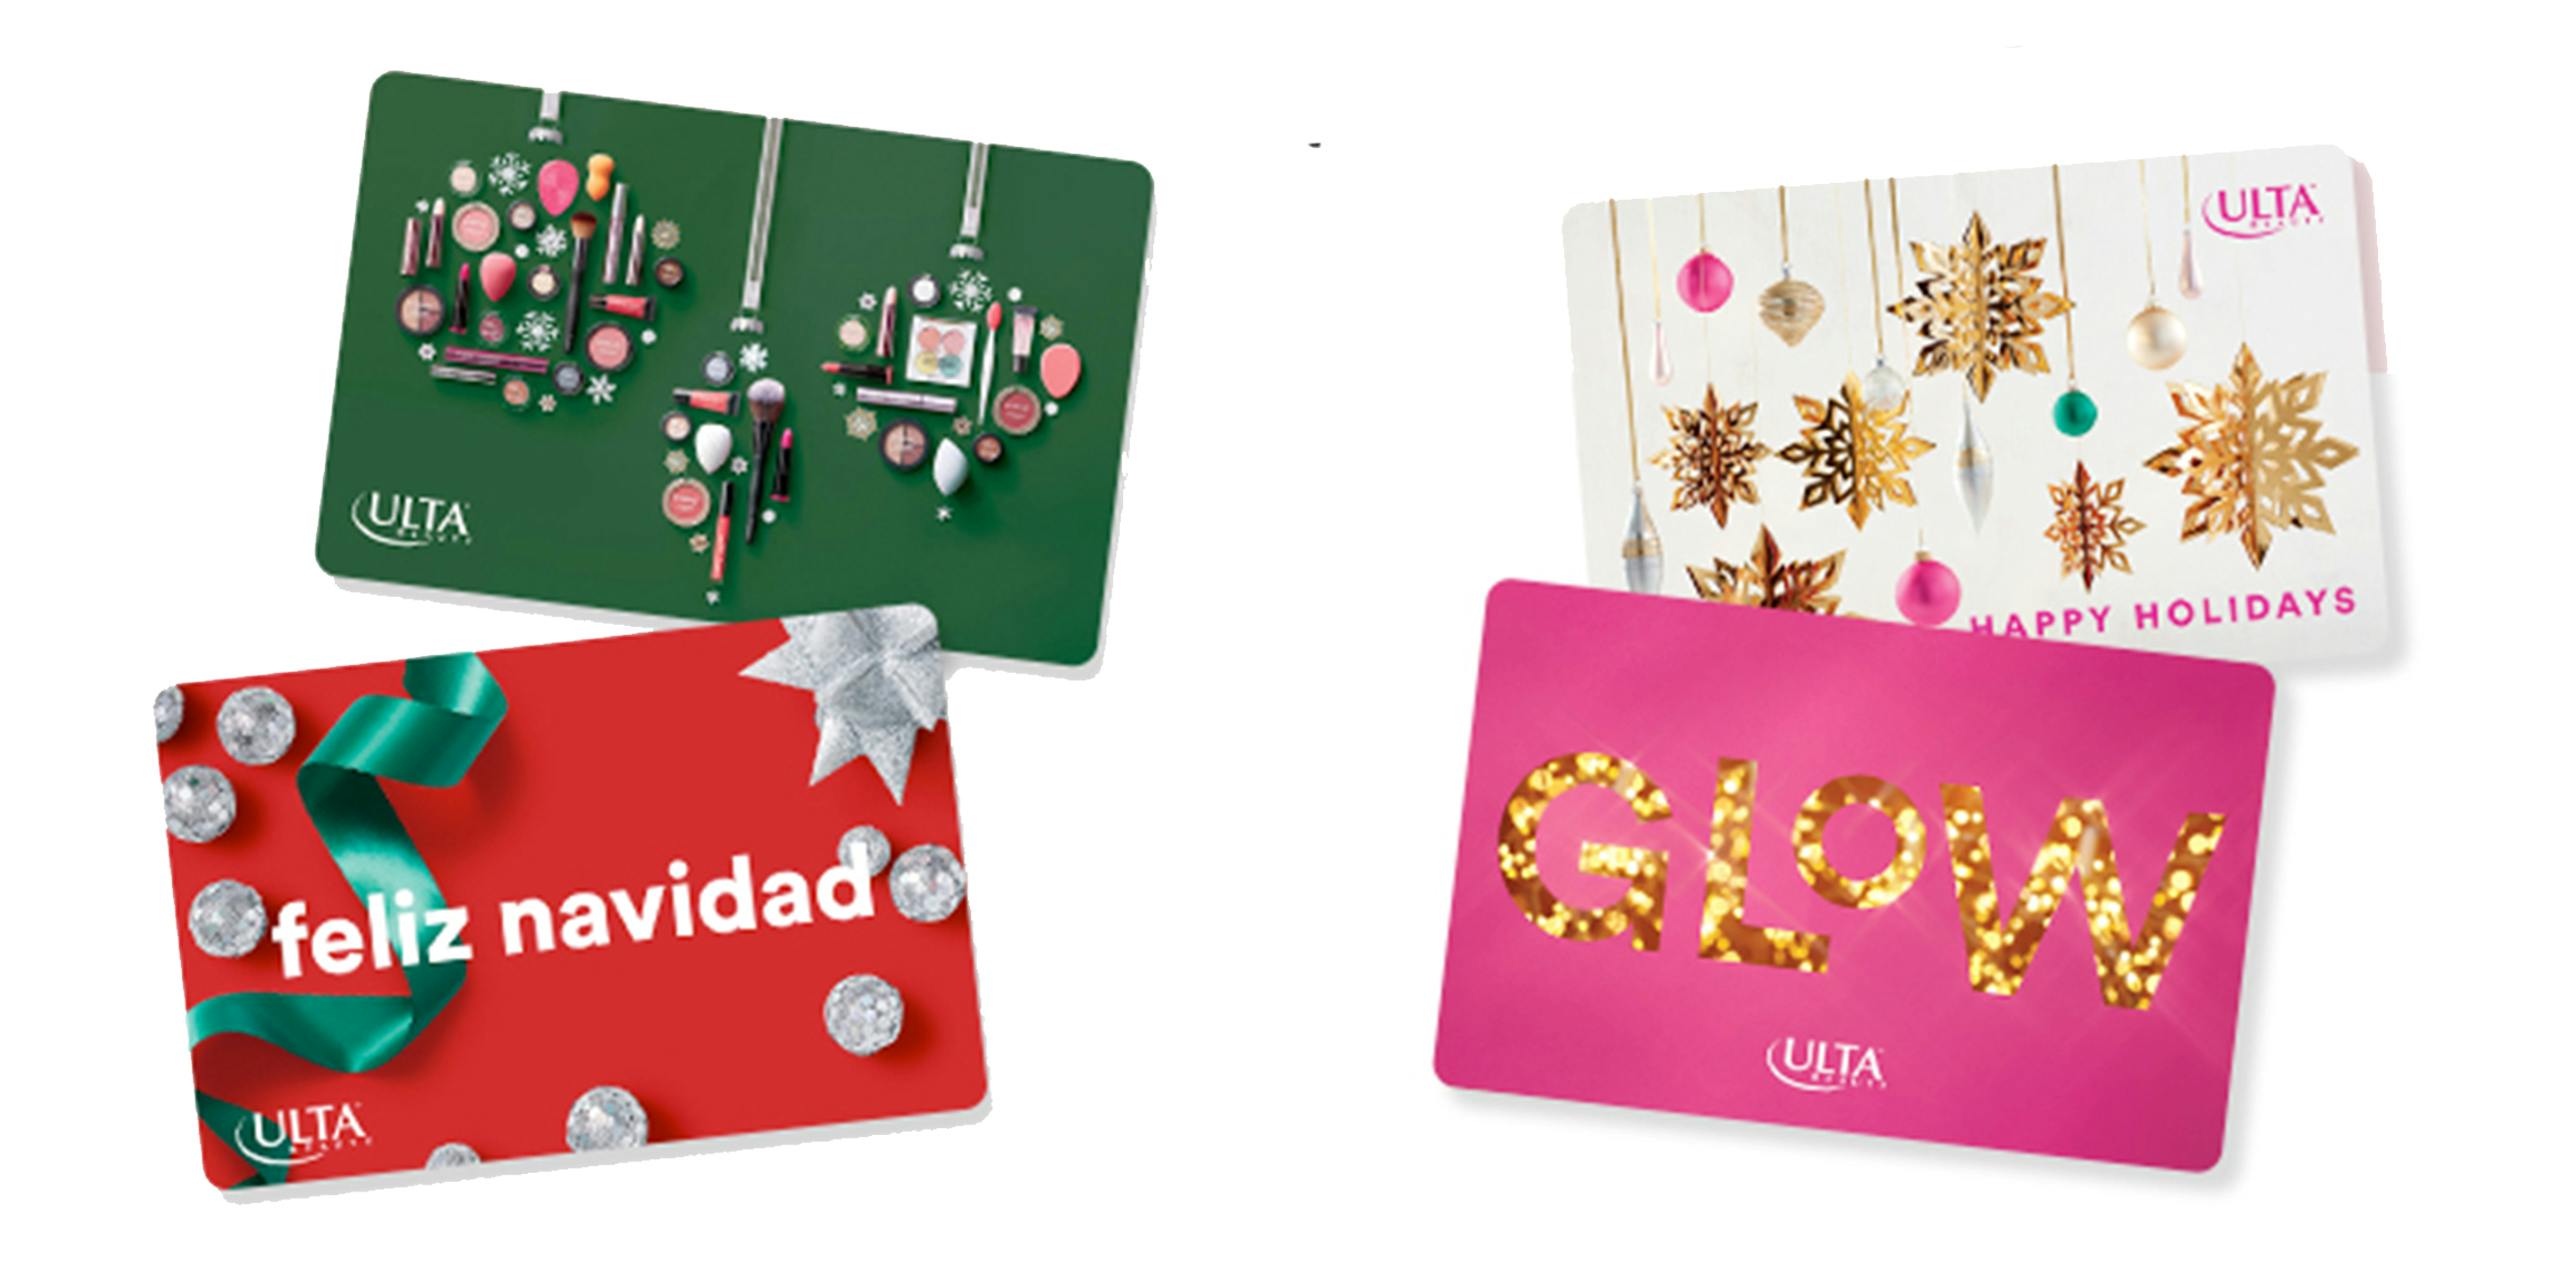 A selection of holiday Ulta gift cards.